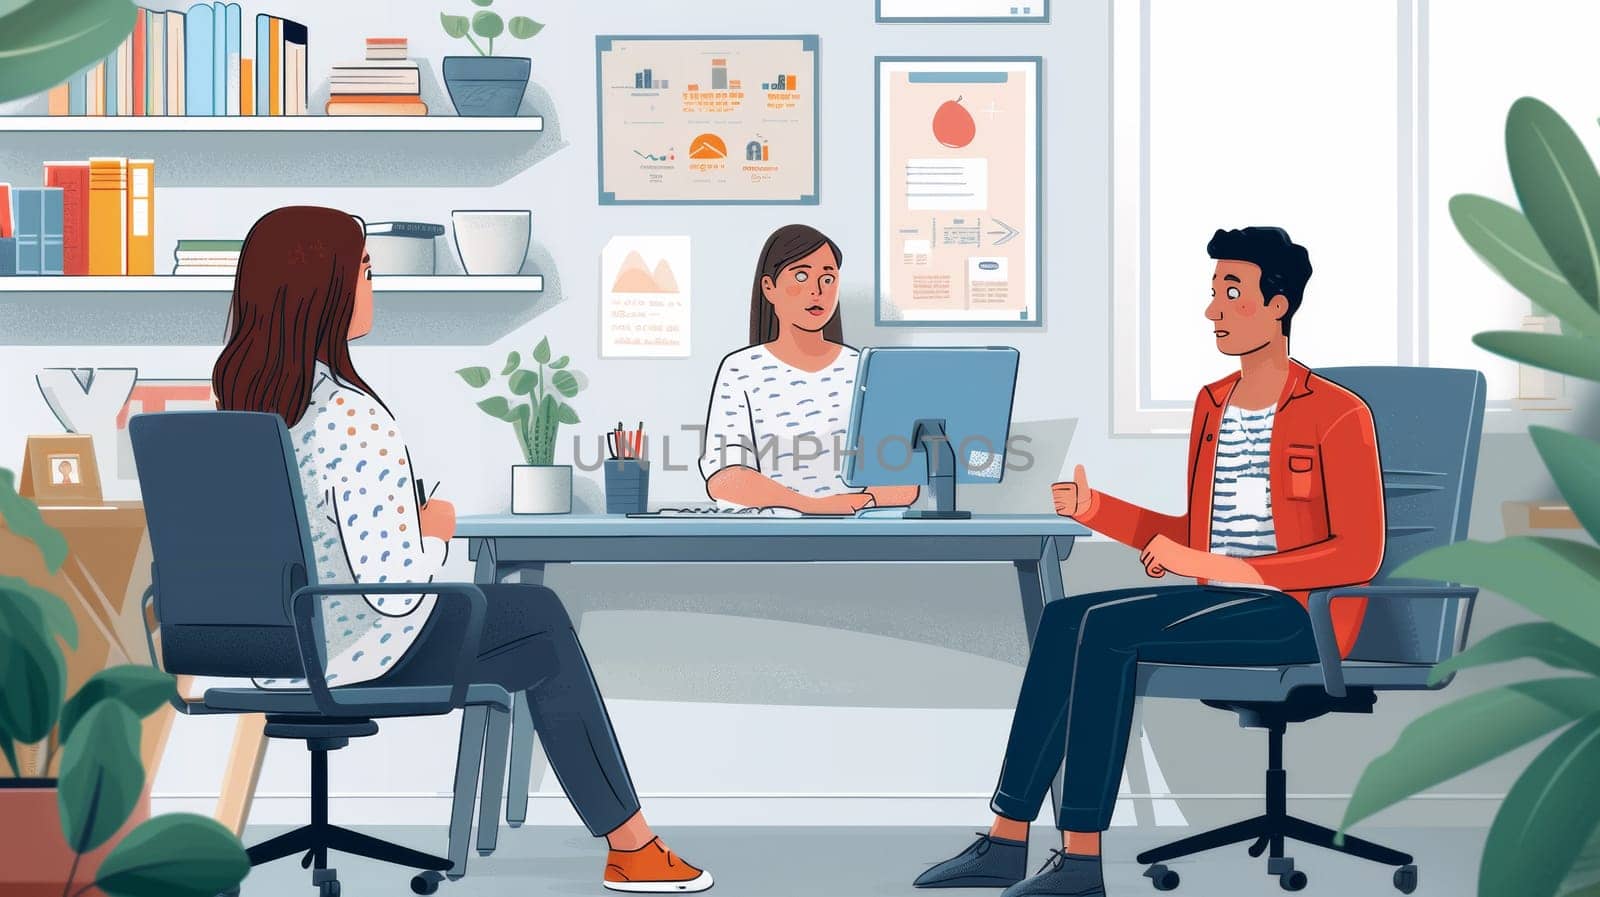 A cartoon illustration of two people sitting at a desk talking to each other, AI by starush